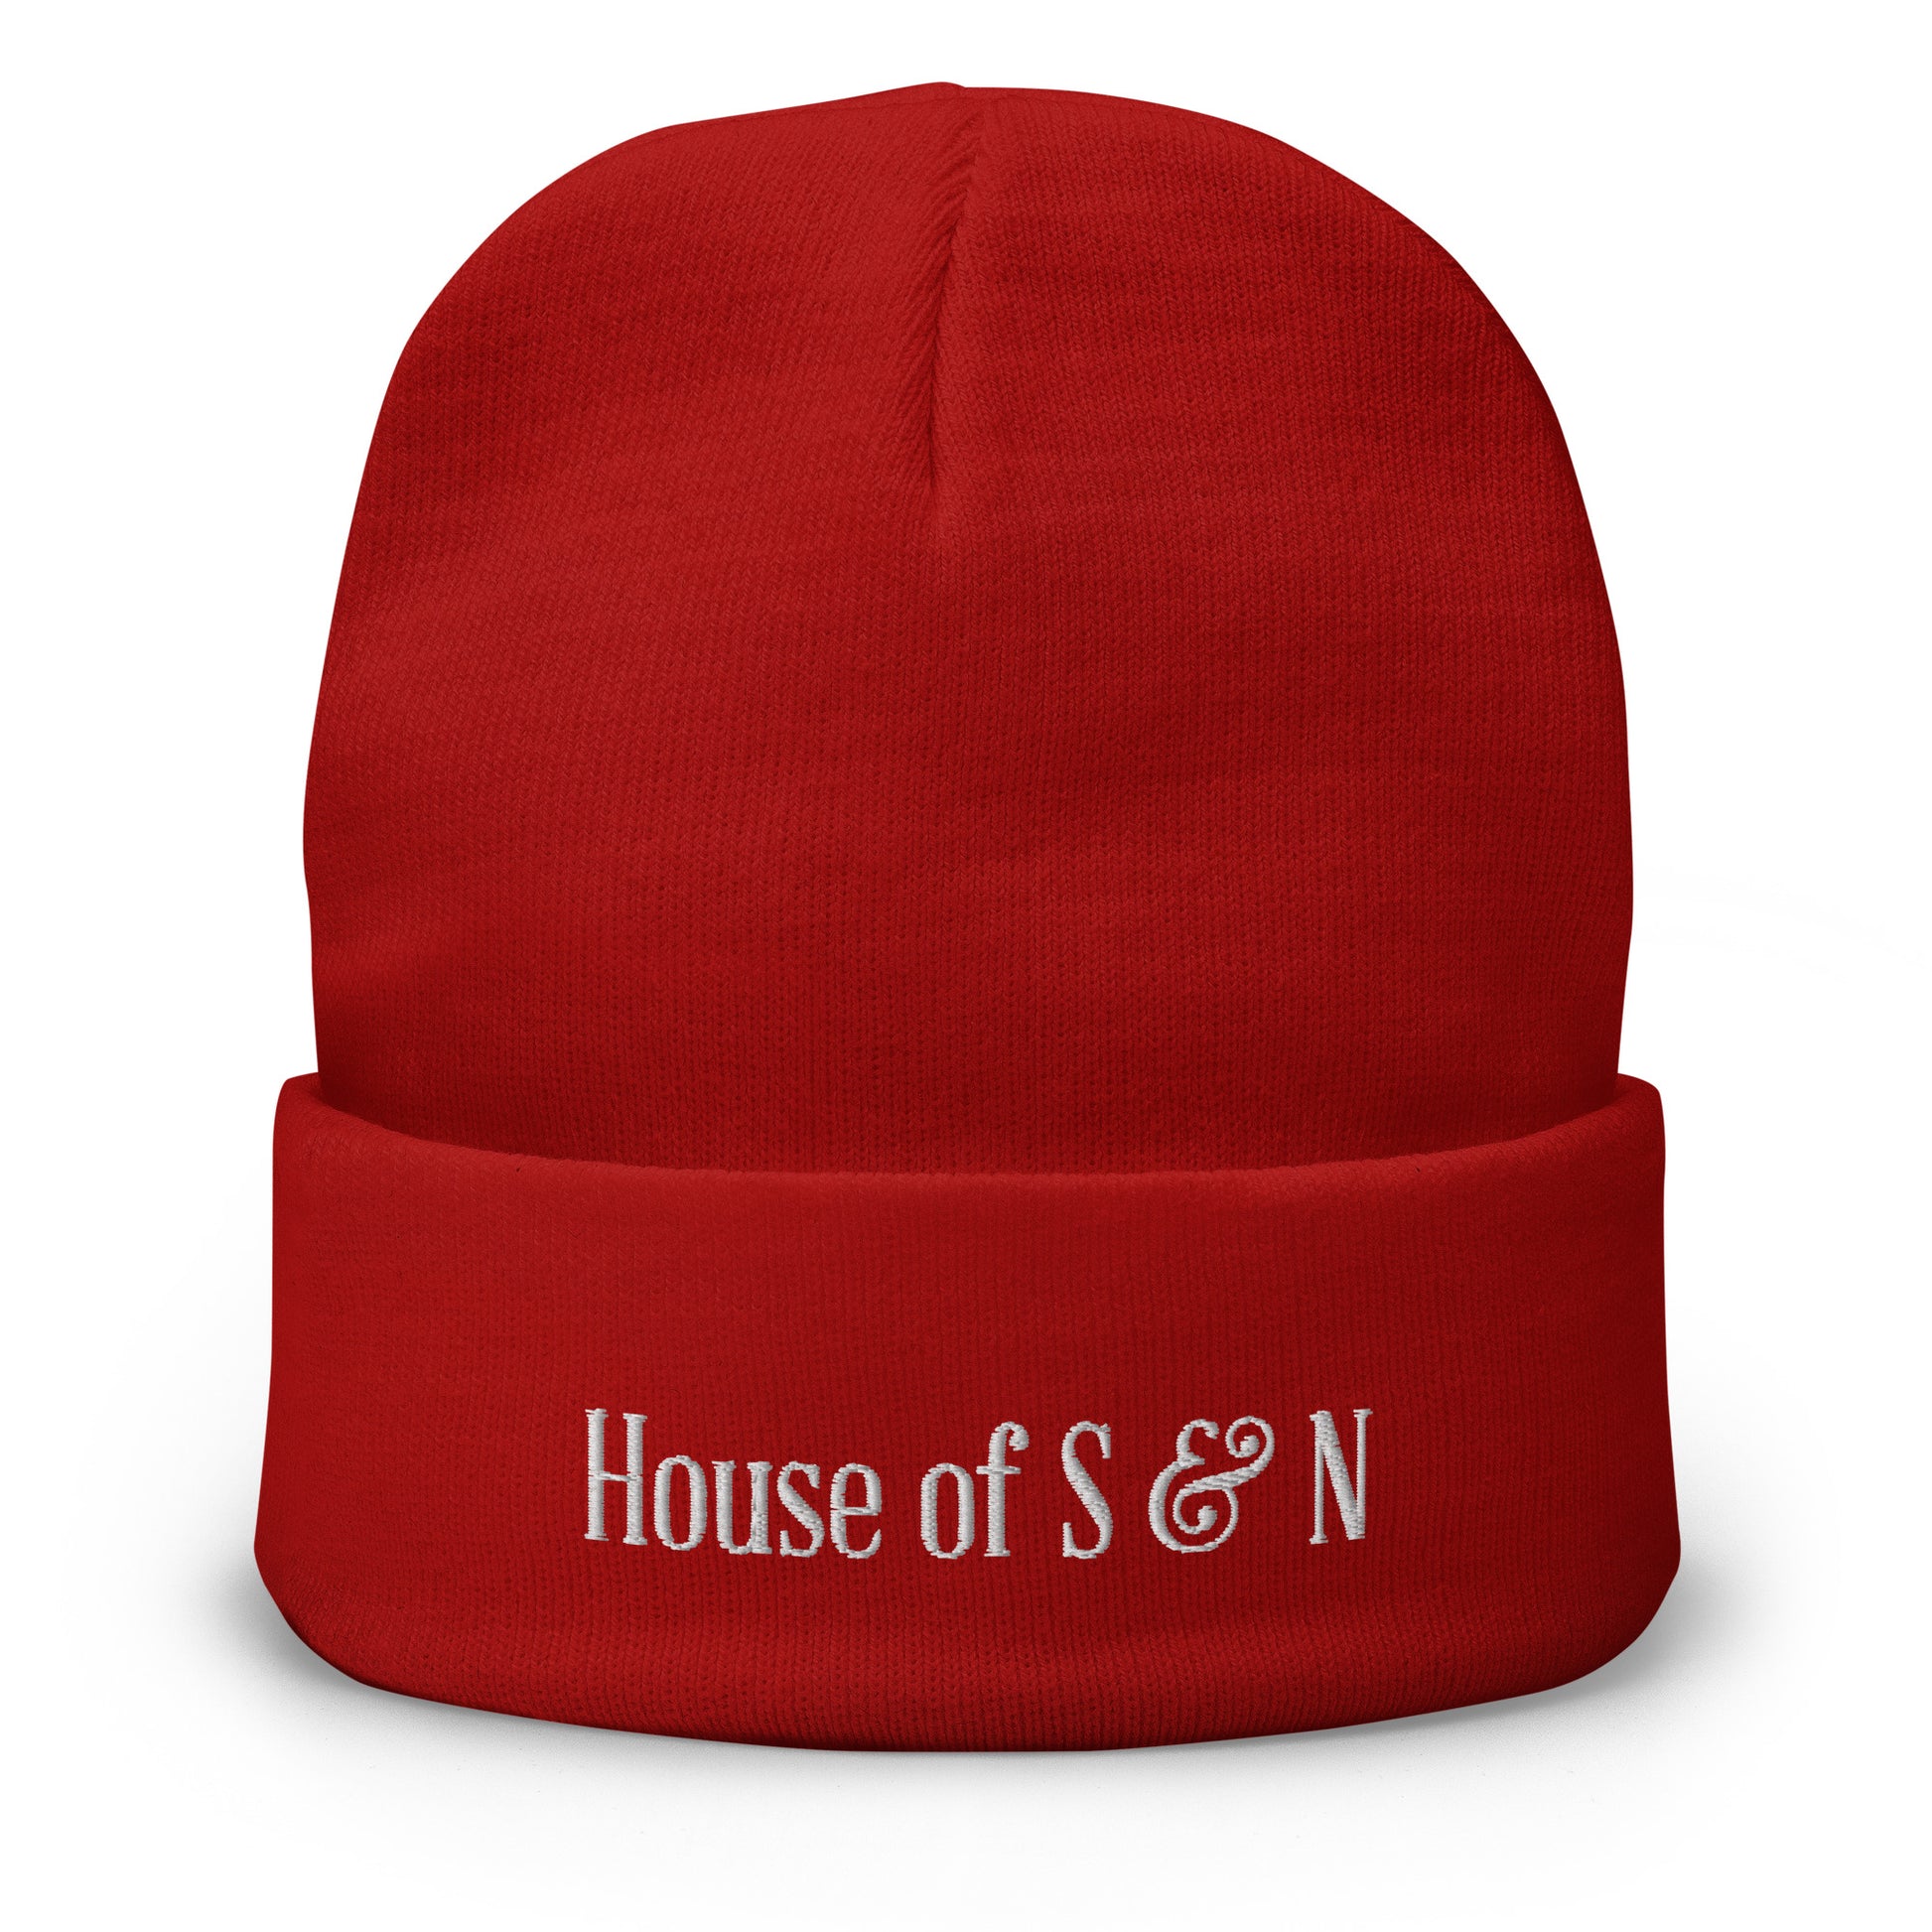 Embroidered Beanie - House of S & N